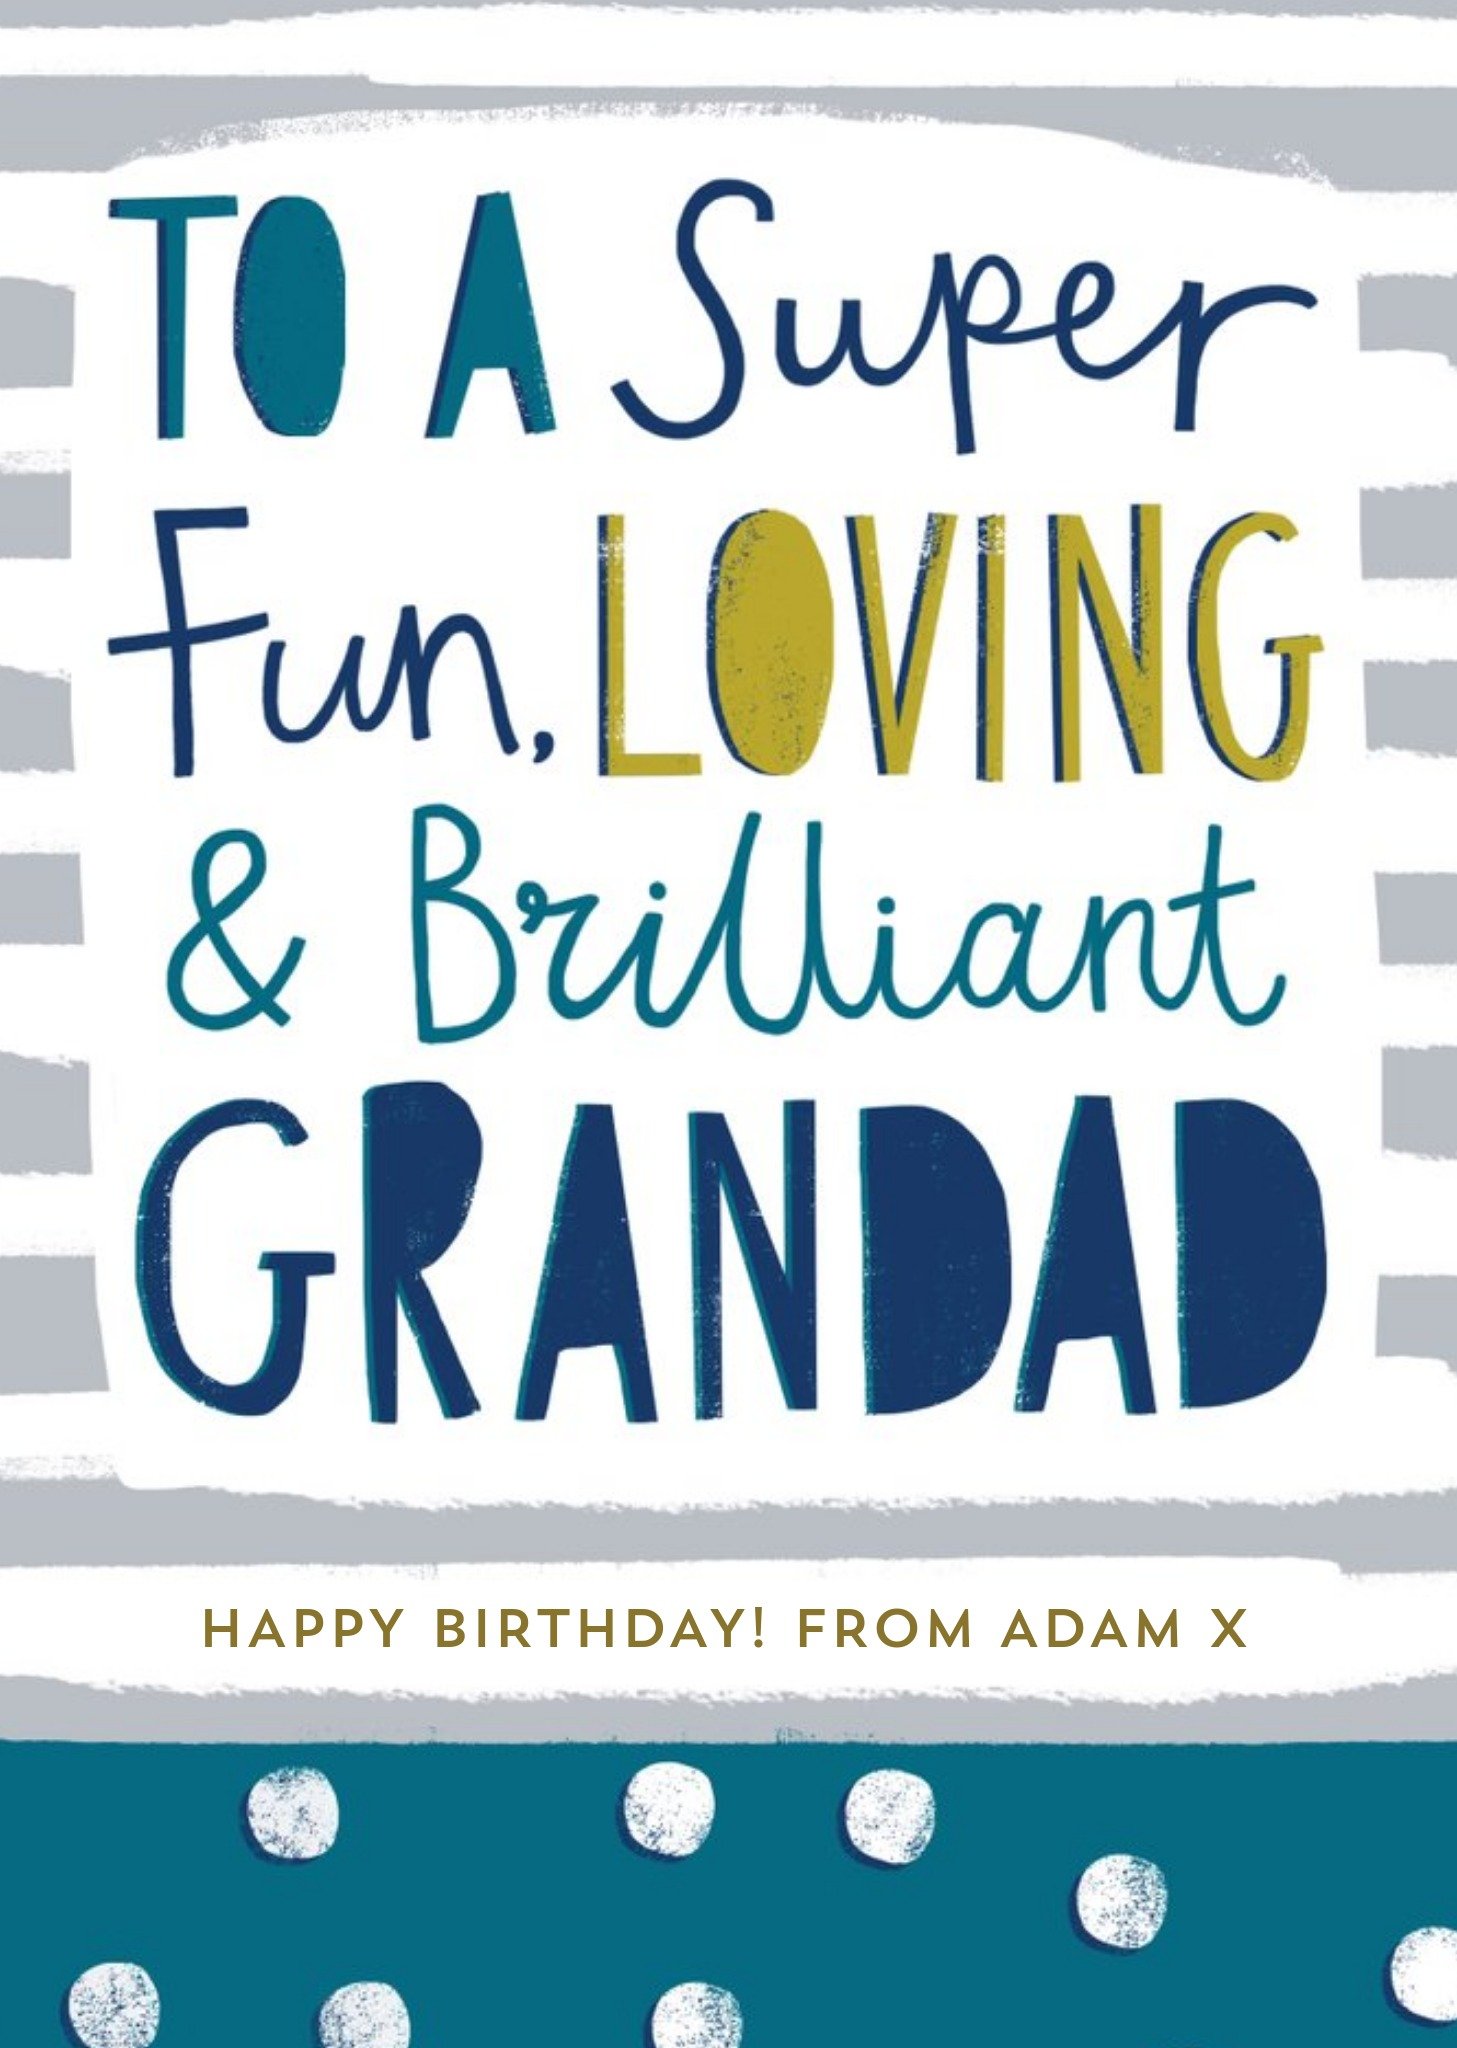 Moonpig Modern Typographic Happy Father's Day Card For A Fun & Loving Grandad Postcard